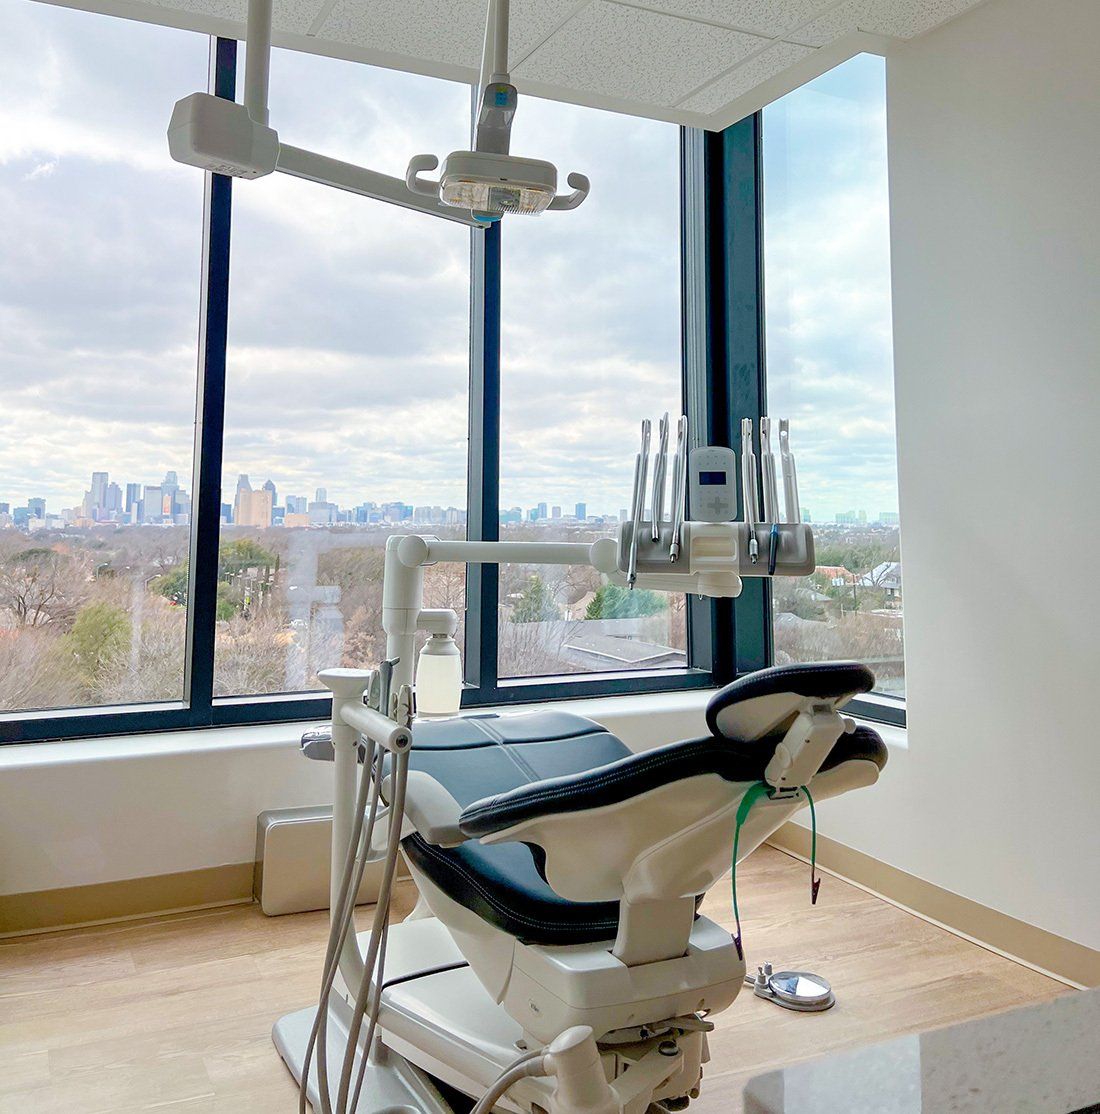 Dentist patient room with advanced technologies